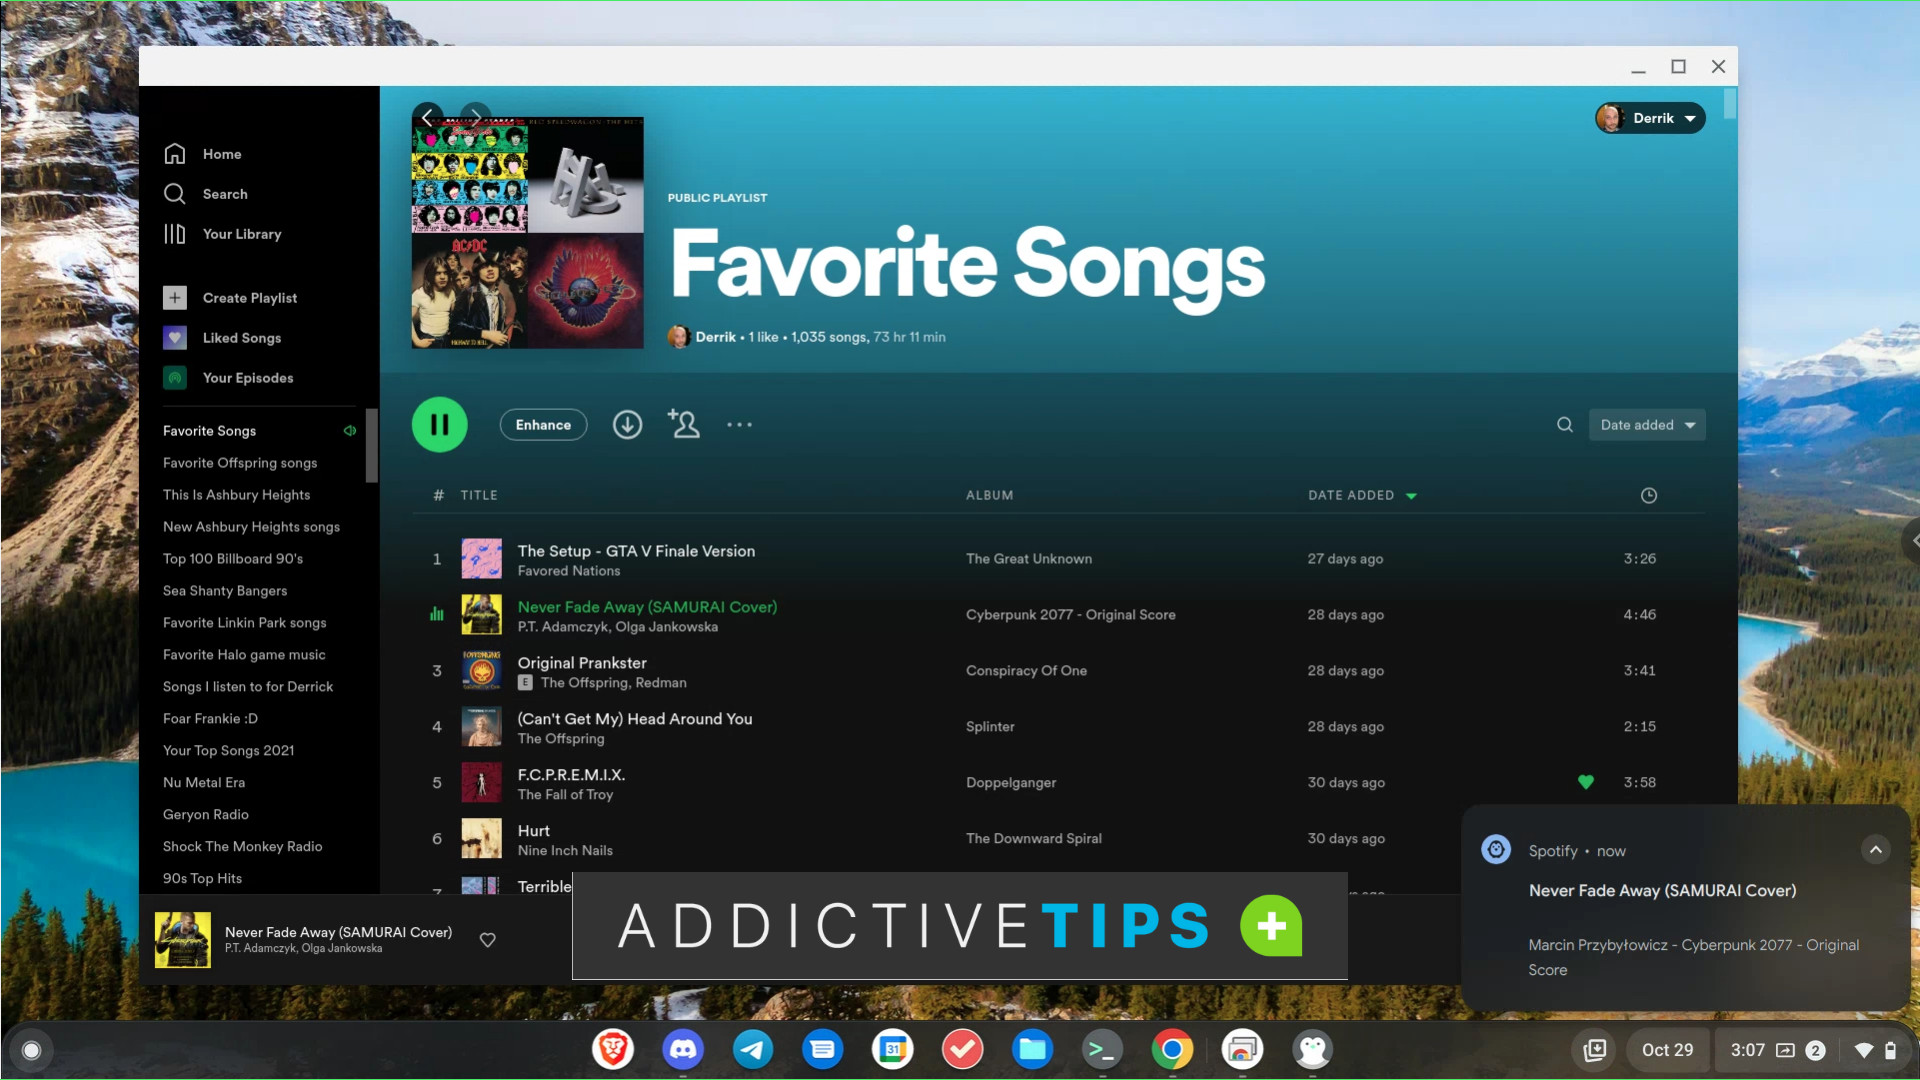 How to listen to Spotify music on a Chromebook - Addictive Tips Guide